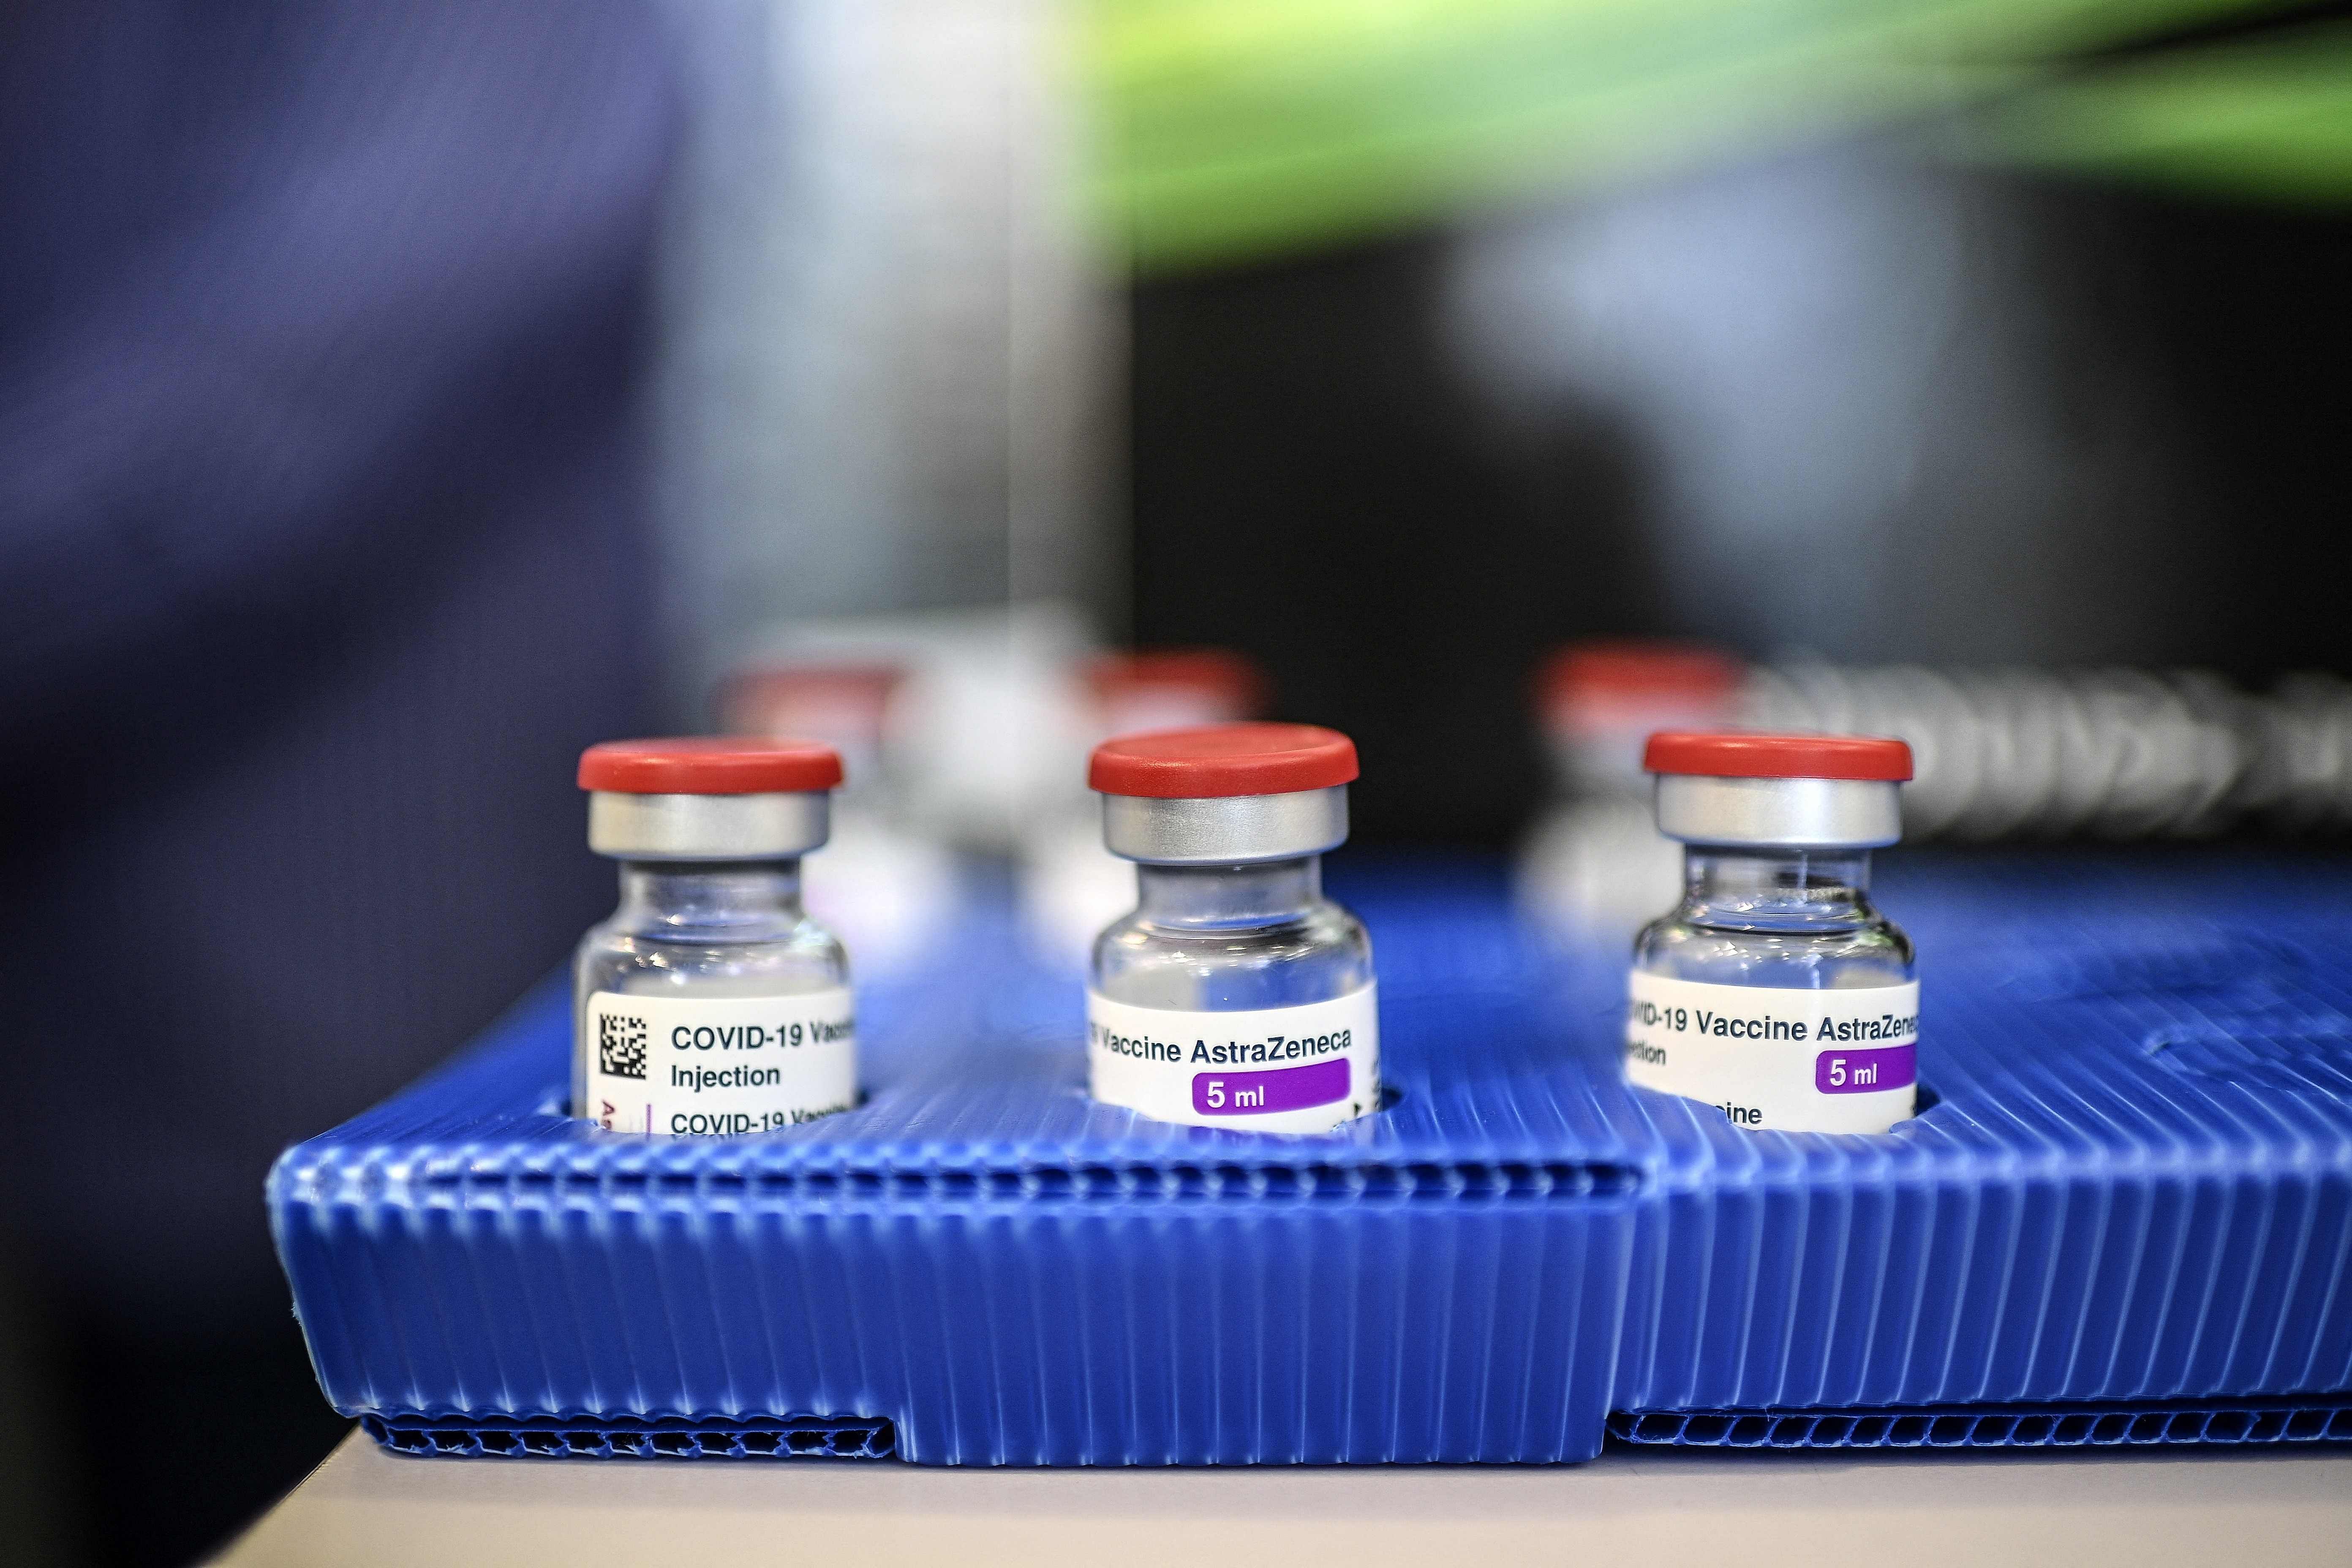 Vials of AstraZeneca Covid-19 vaccine at a pharmacy. Credit: AFP Photo